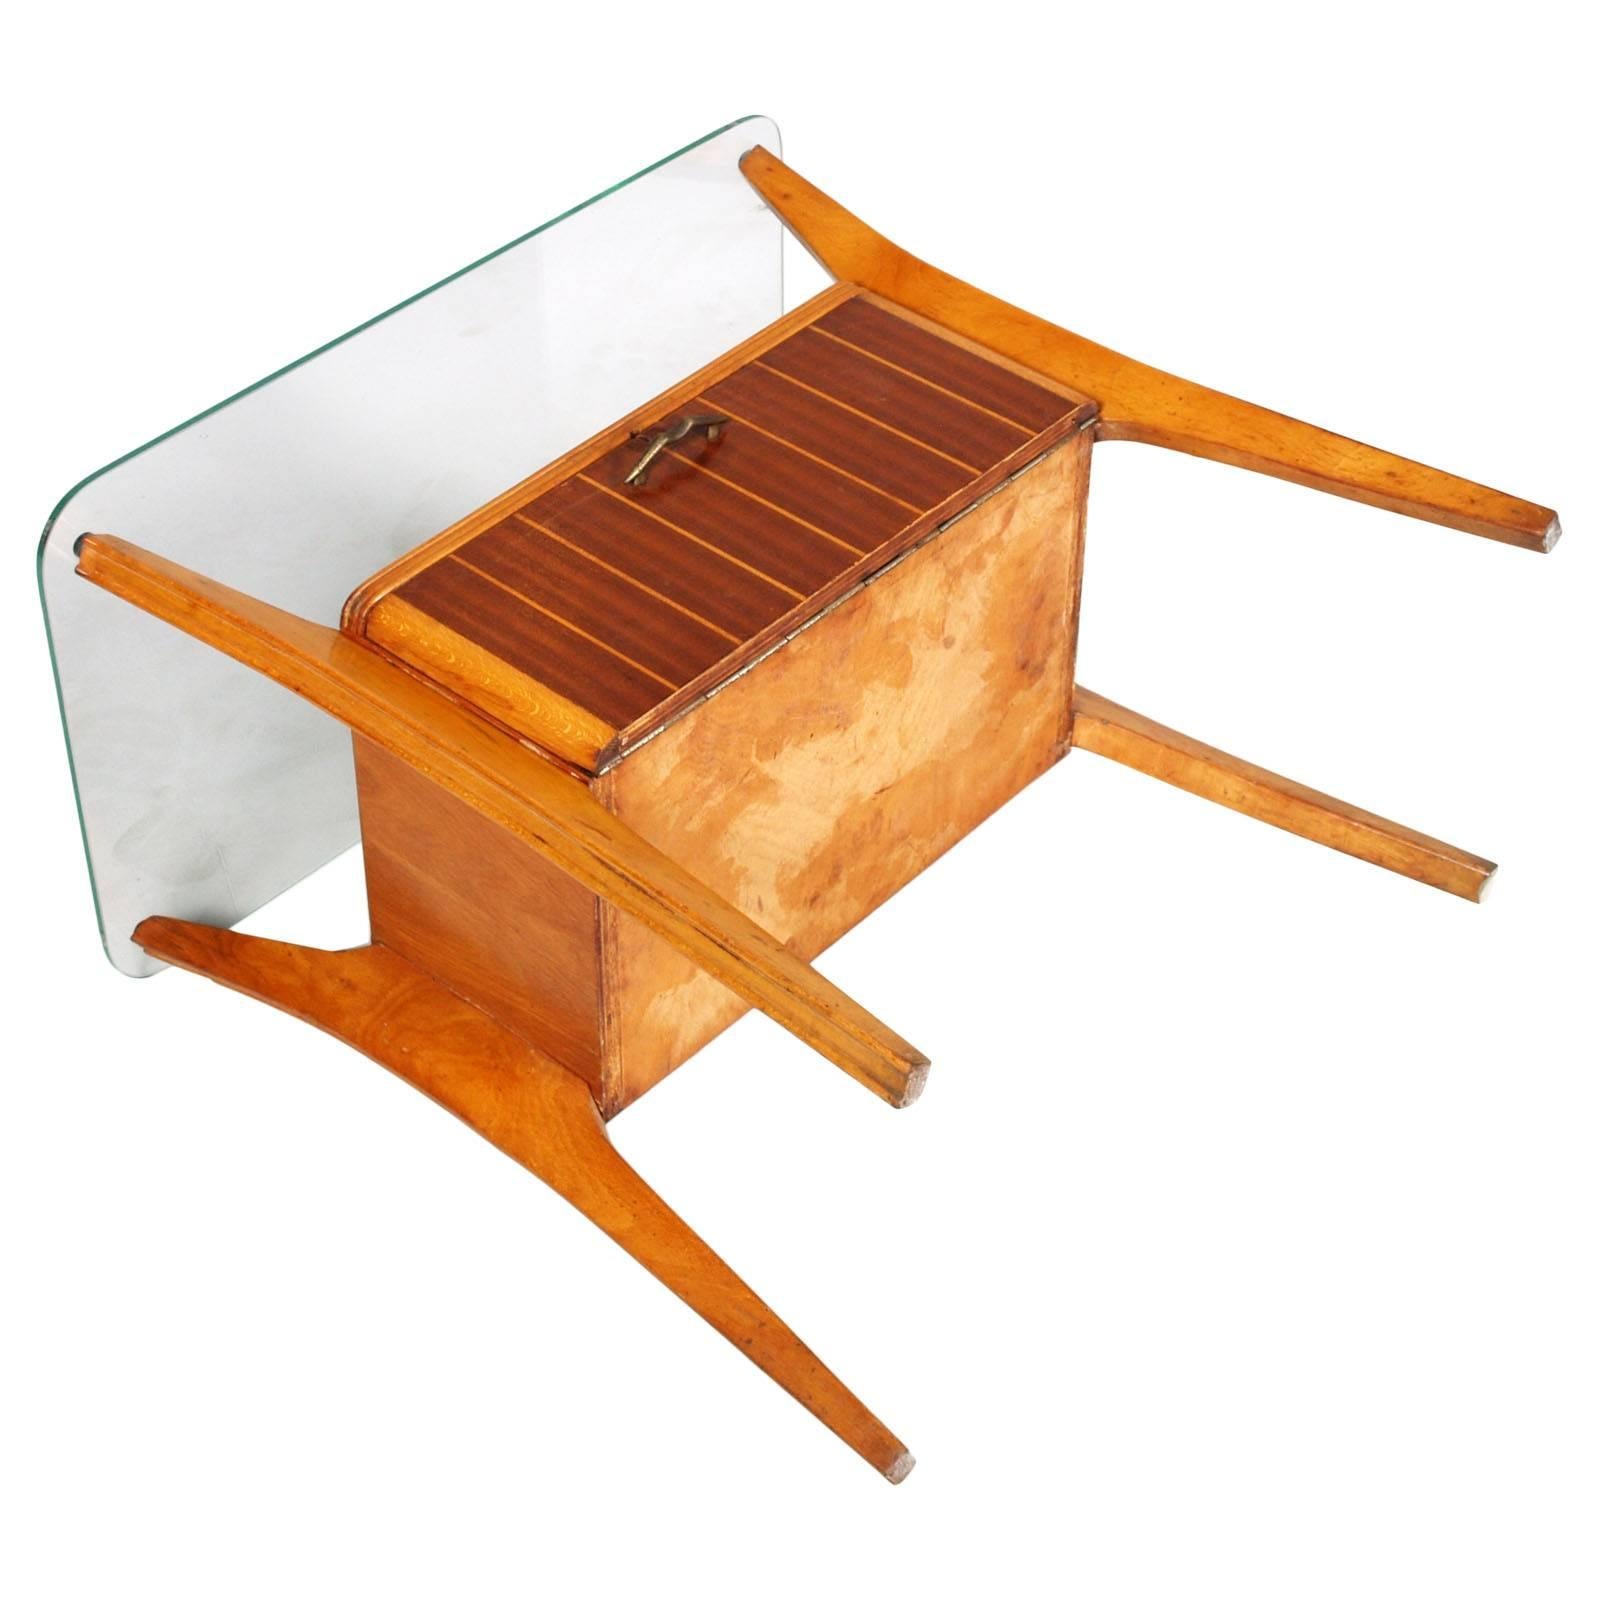 20th Century 1940s Cantù Nightstand Table Gio Ponti attributable in Walnut, Maple Crystal Top For Sale